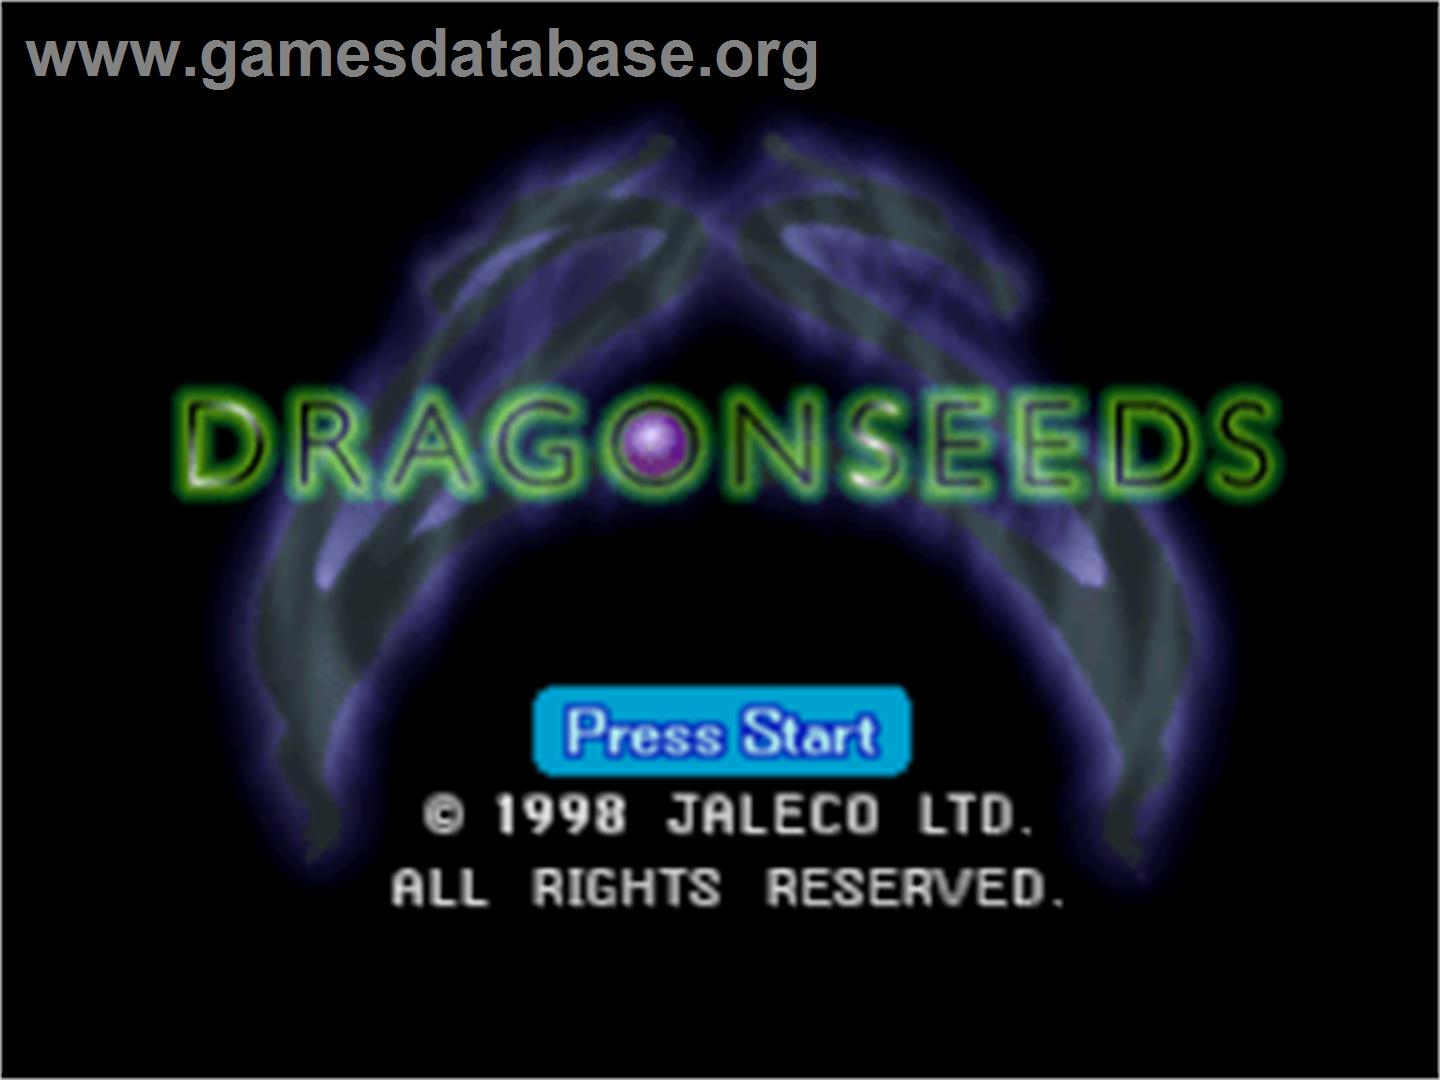 Dragon Seeds - Sony Playstation - Artwork - Title Screen